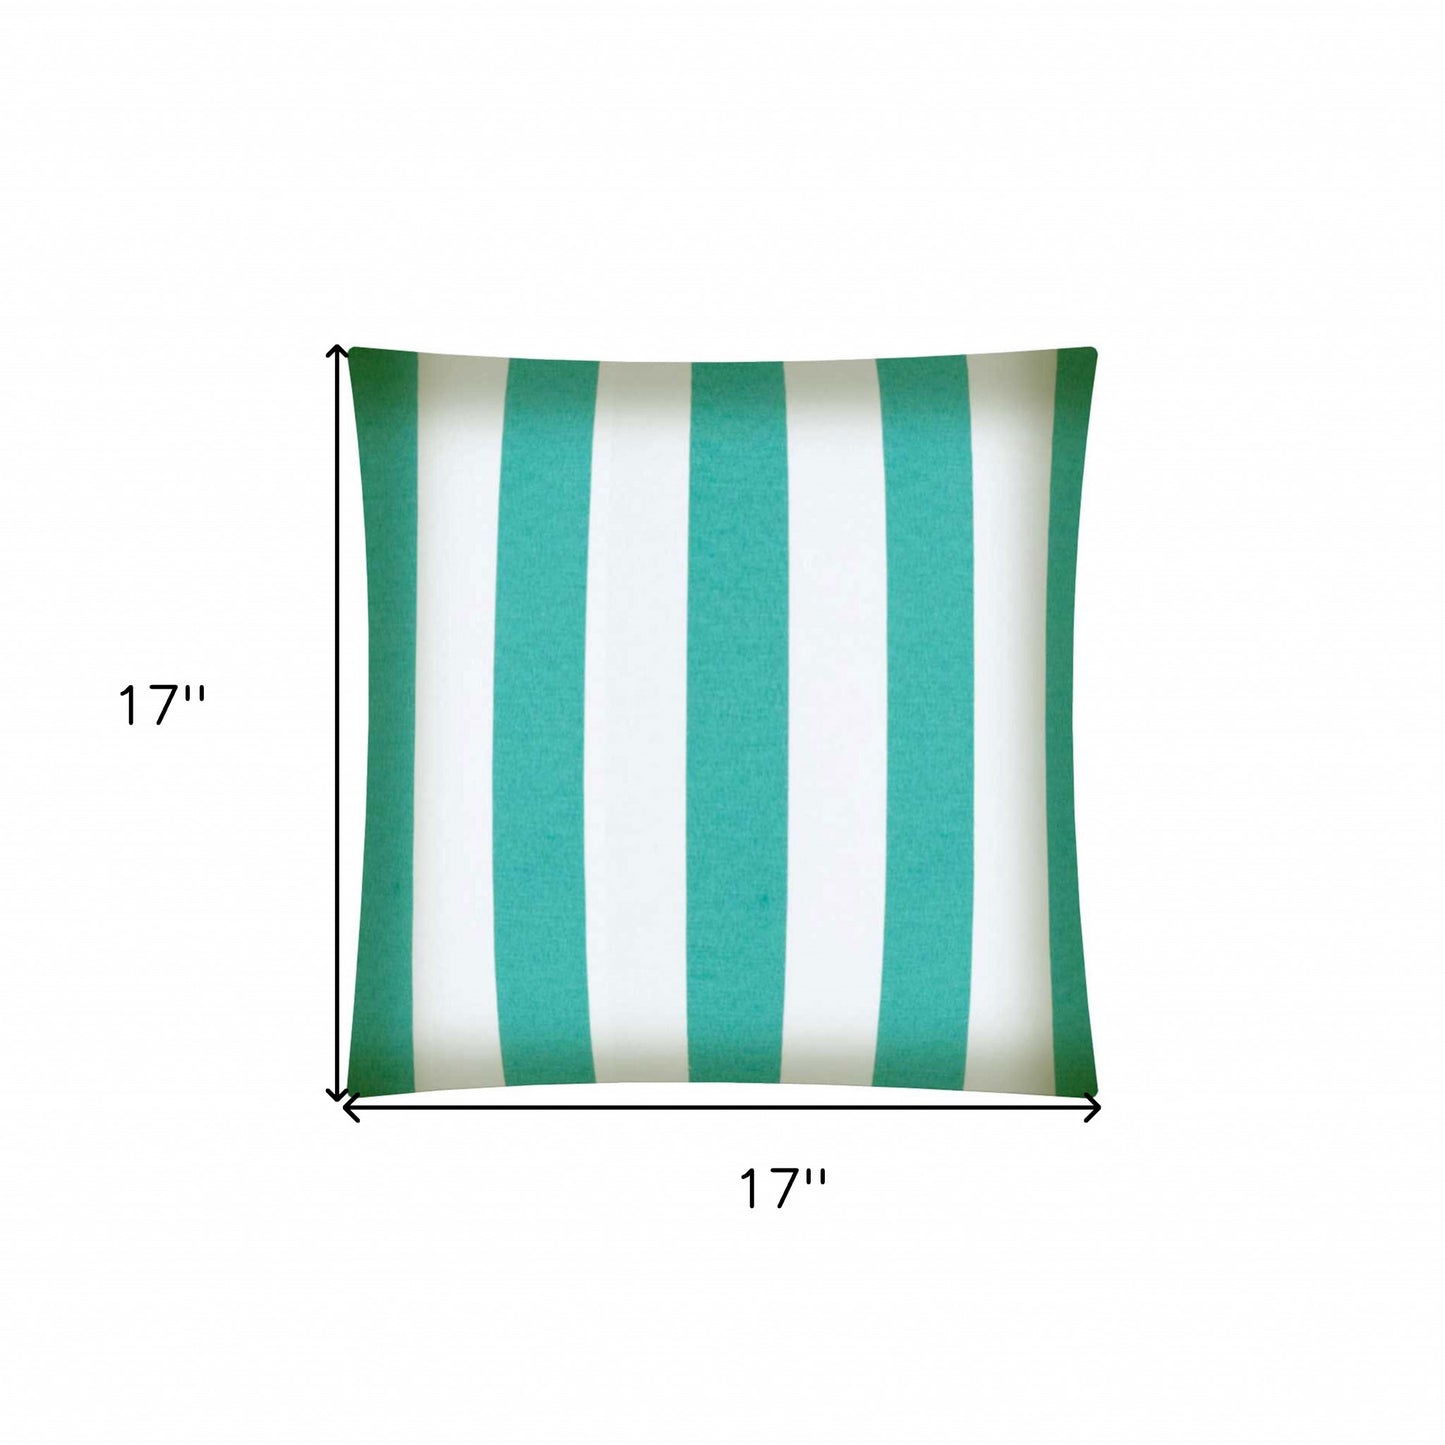 17" Turquoise and White Striped Indoor Outdoor Throw Pillow Cover